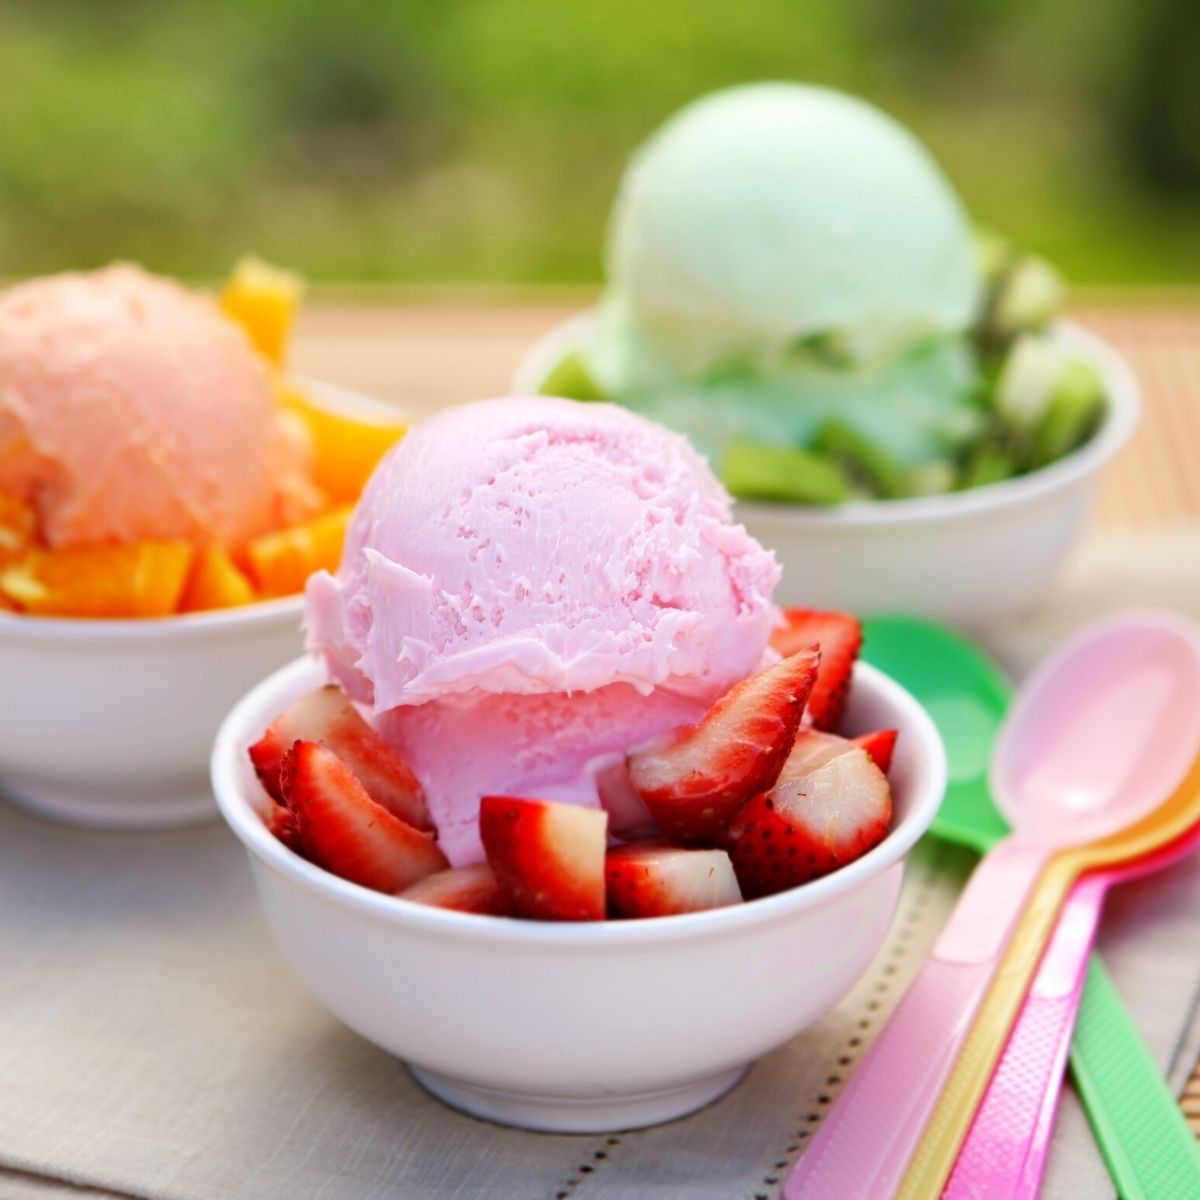 Bowls of ice cream with fresh fruit and colorful spoons.